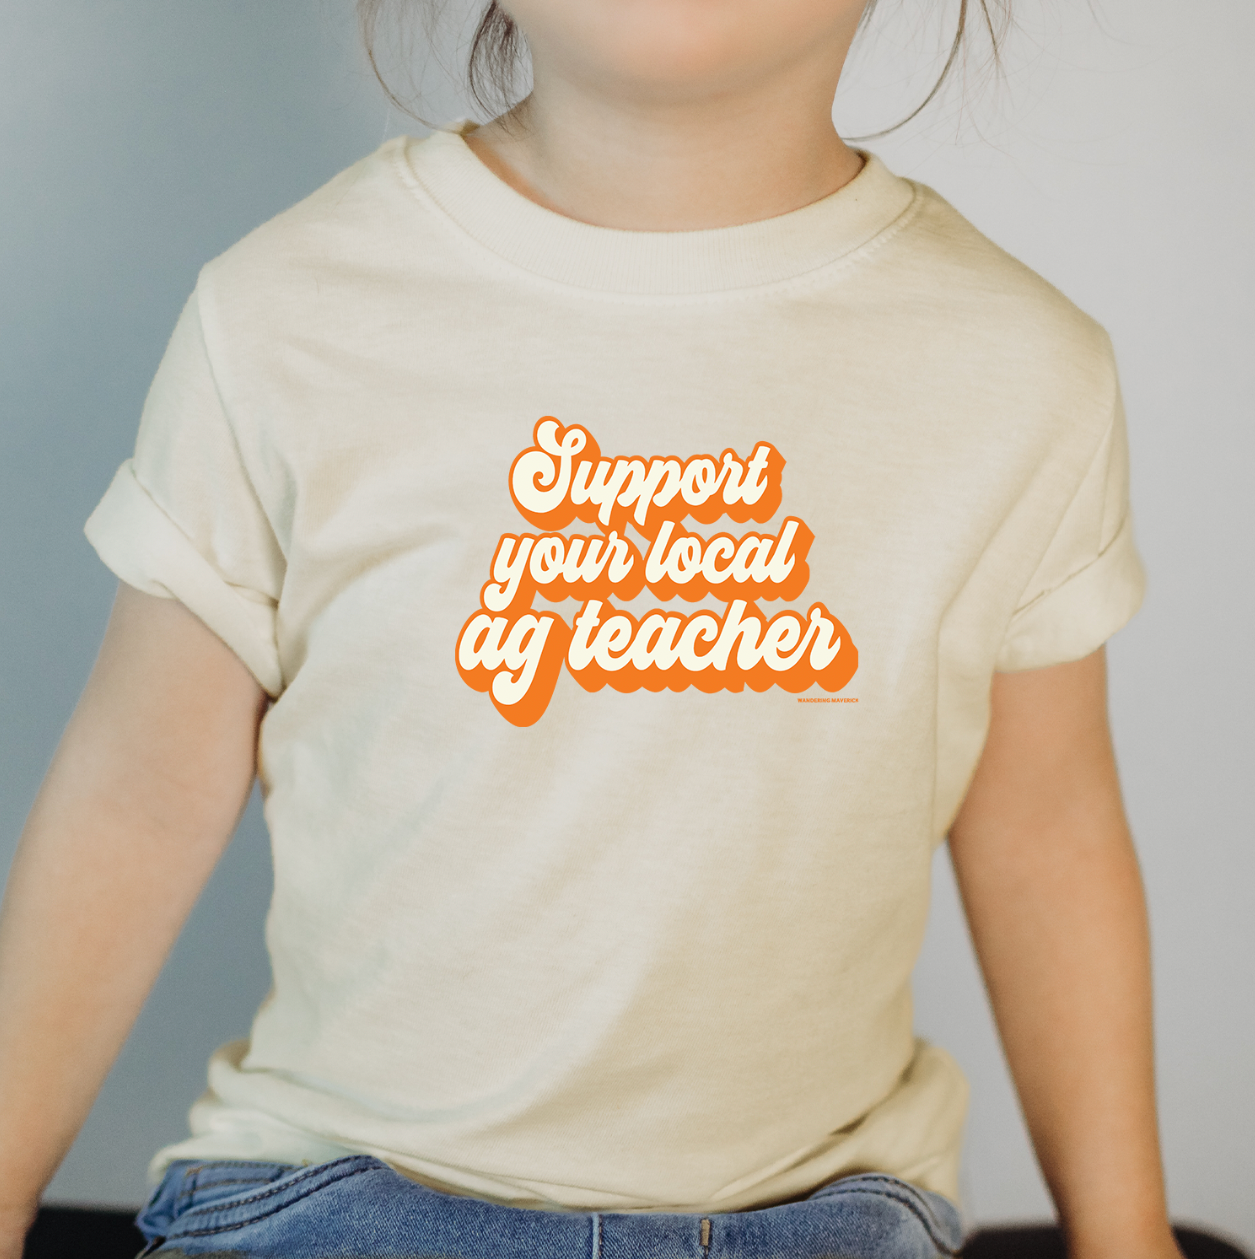 Retro Support Your Local Ag Teacher Orange One Piece/T-Shirt (Newborn - Youth XL) - Multiple Colors!